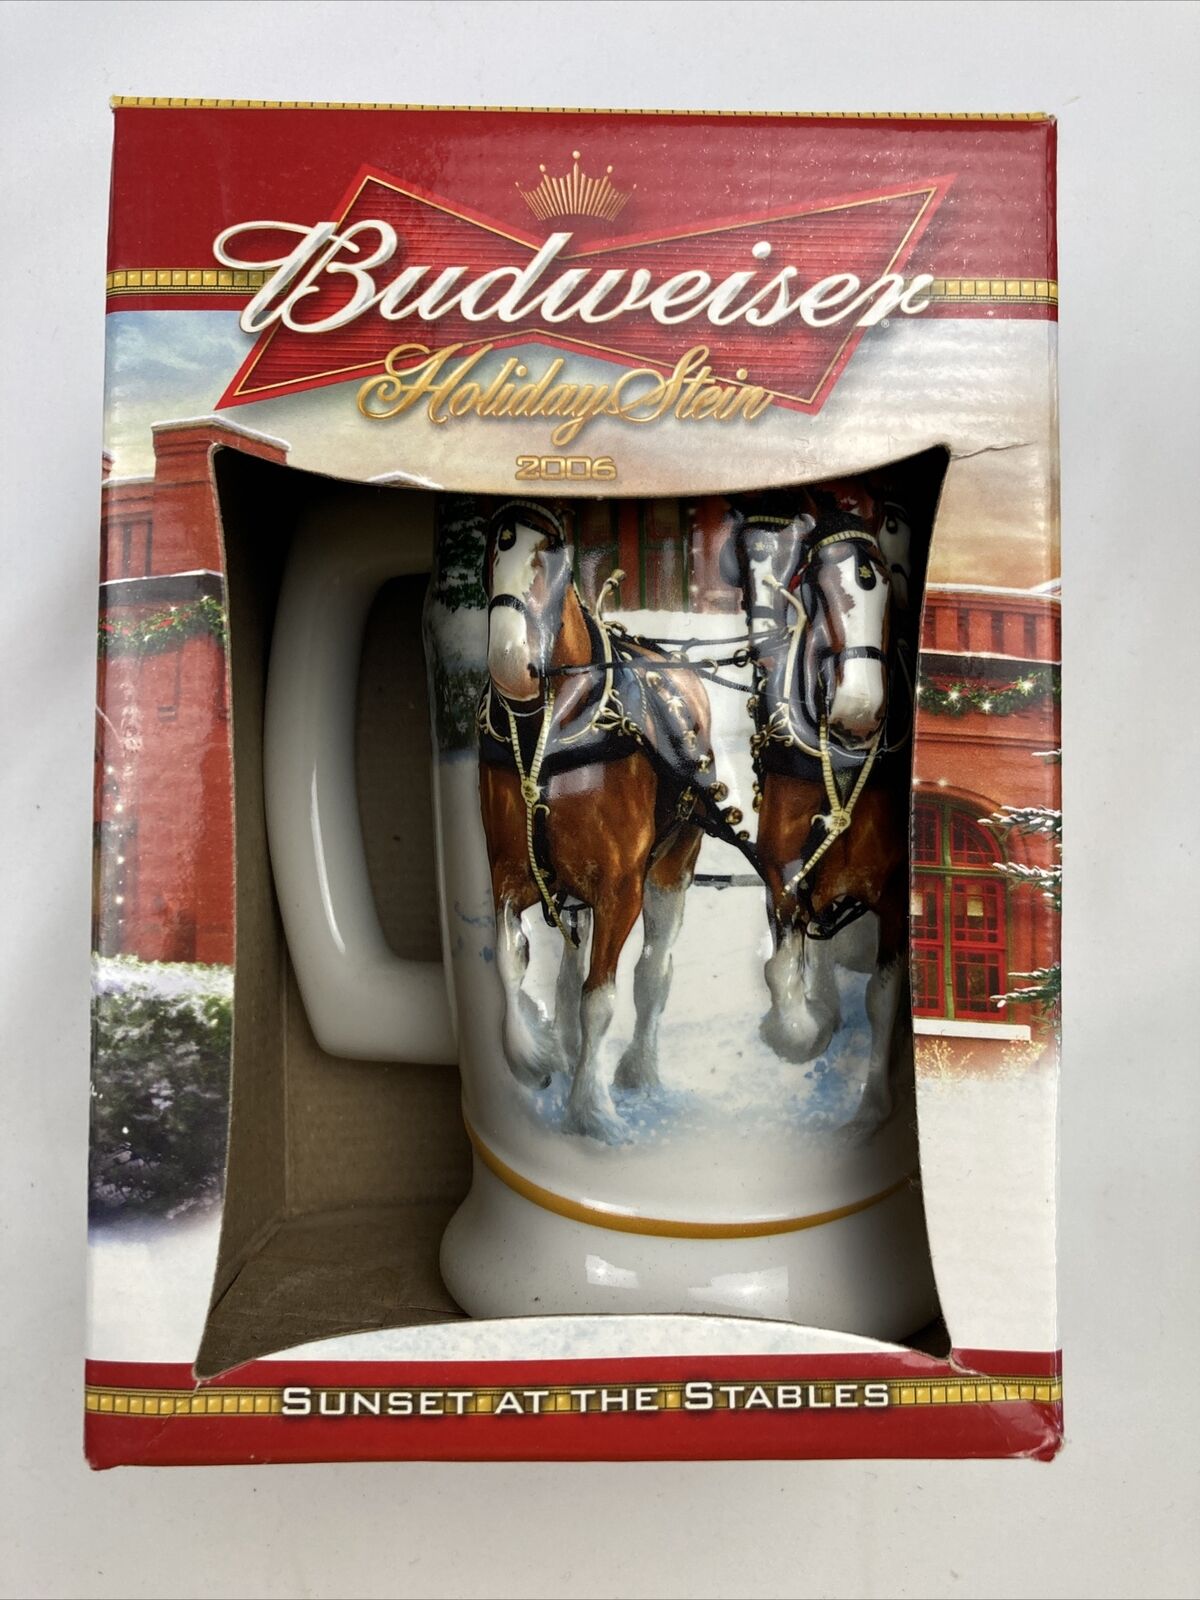 Budweiser Holiday Stein 2006 Clydesdales Christmas Beer Sunset at the Stables 